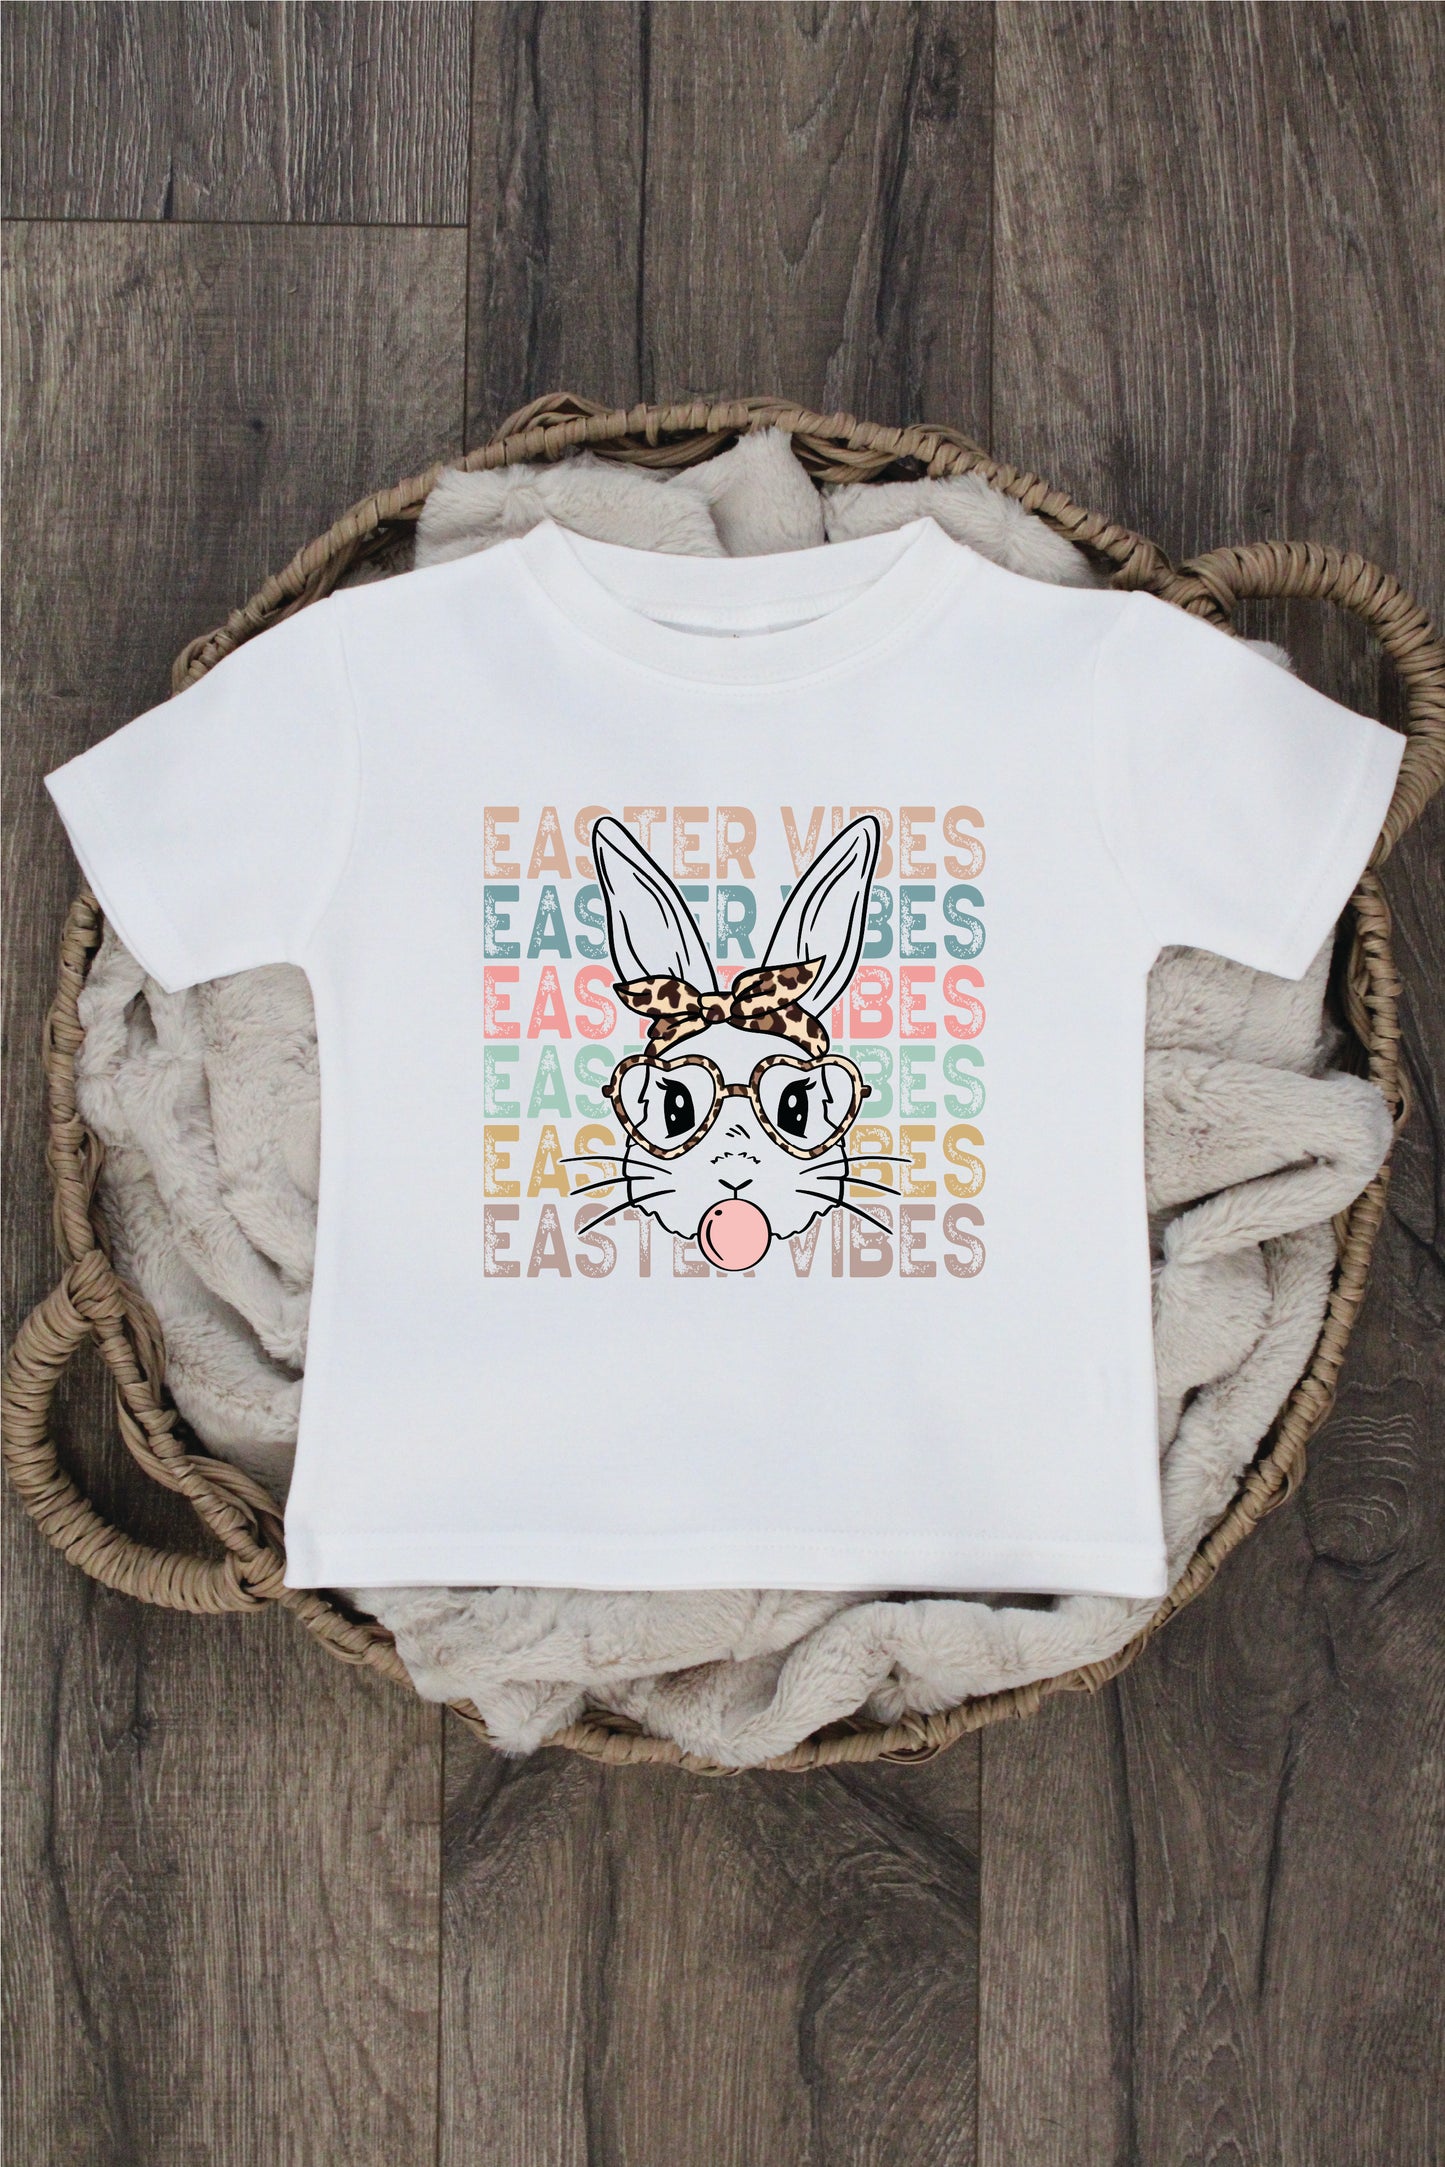 Easter Vibes Shirts